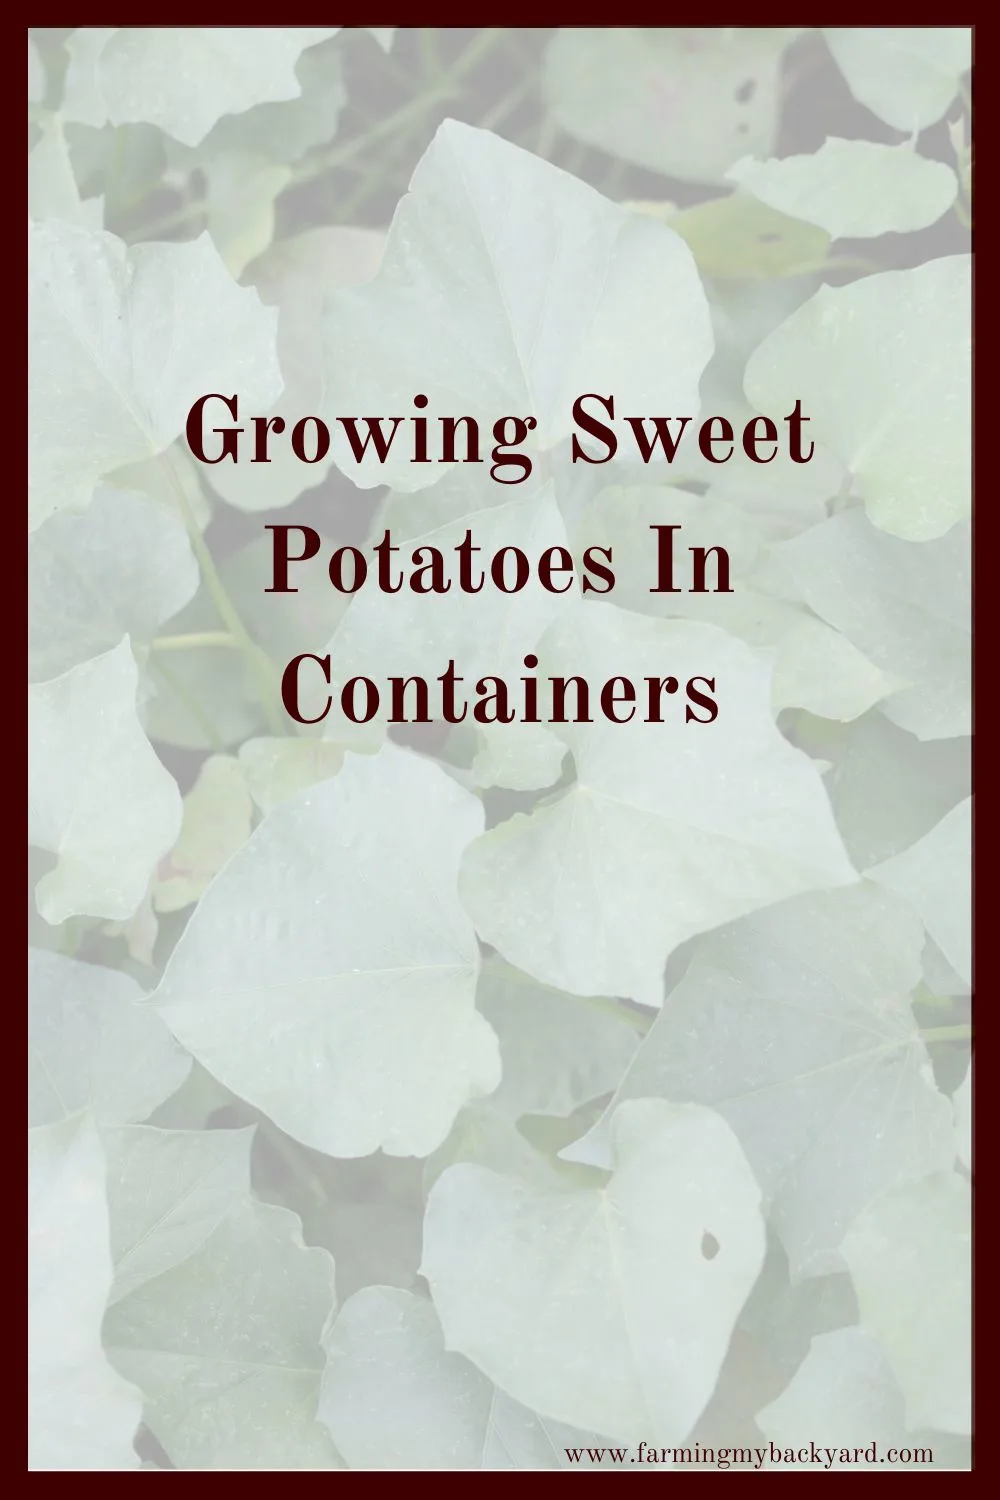 Sweet potatoes are a great to grow yourself. Even if you don't have much space, growing sweet potatoes in containers is totally an option!